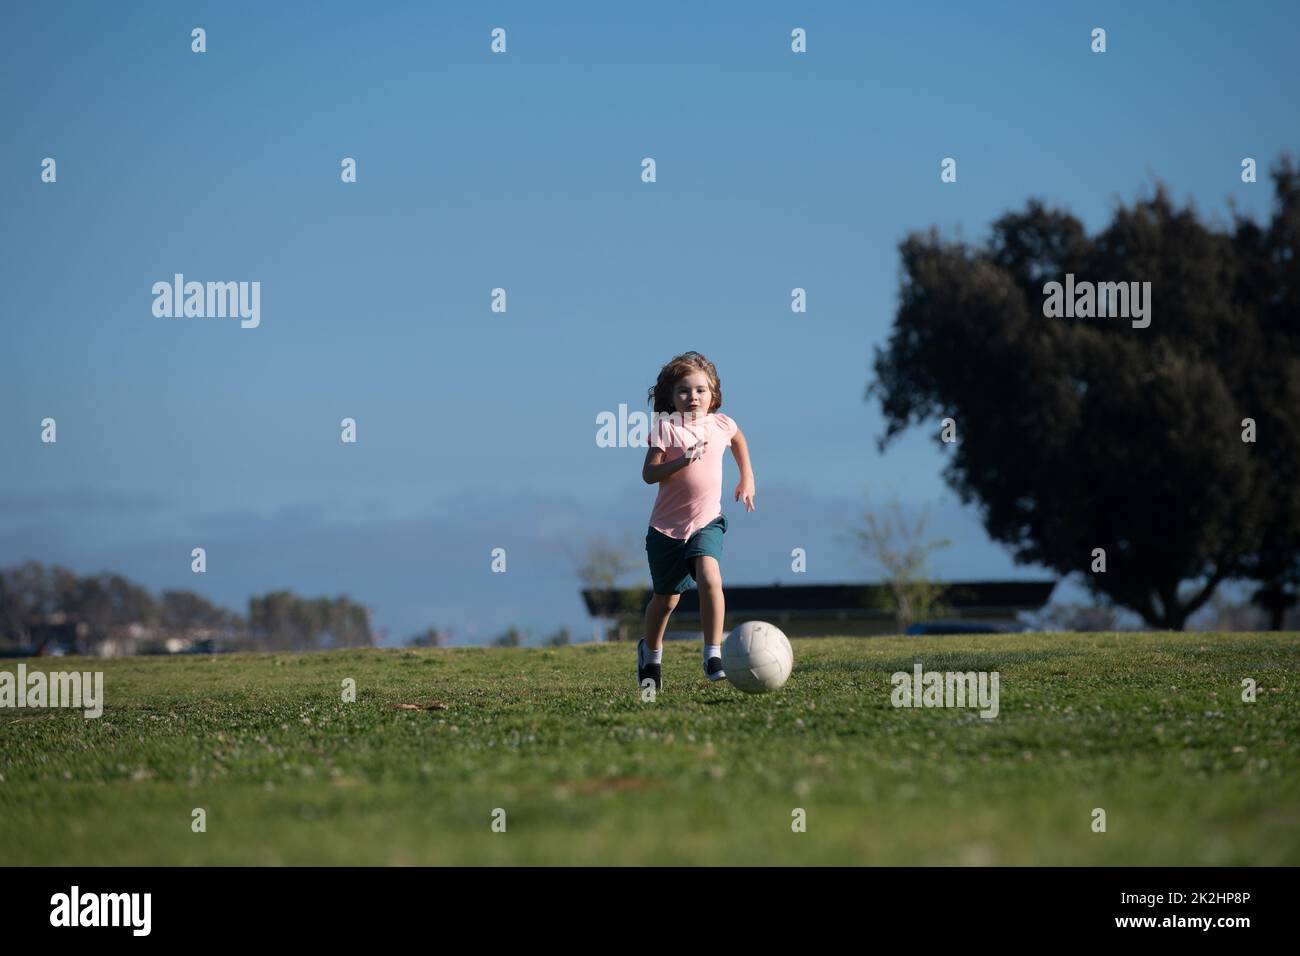 Excited child boy kicking ball in the grass outdoors. Soccer kids, children play football. Kids training soccer. Stock Photo